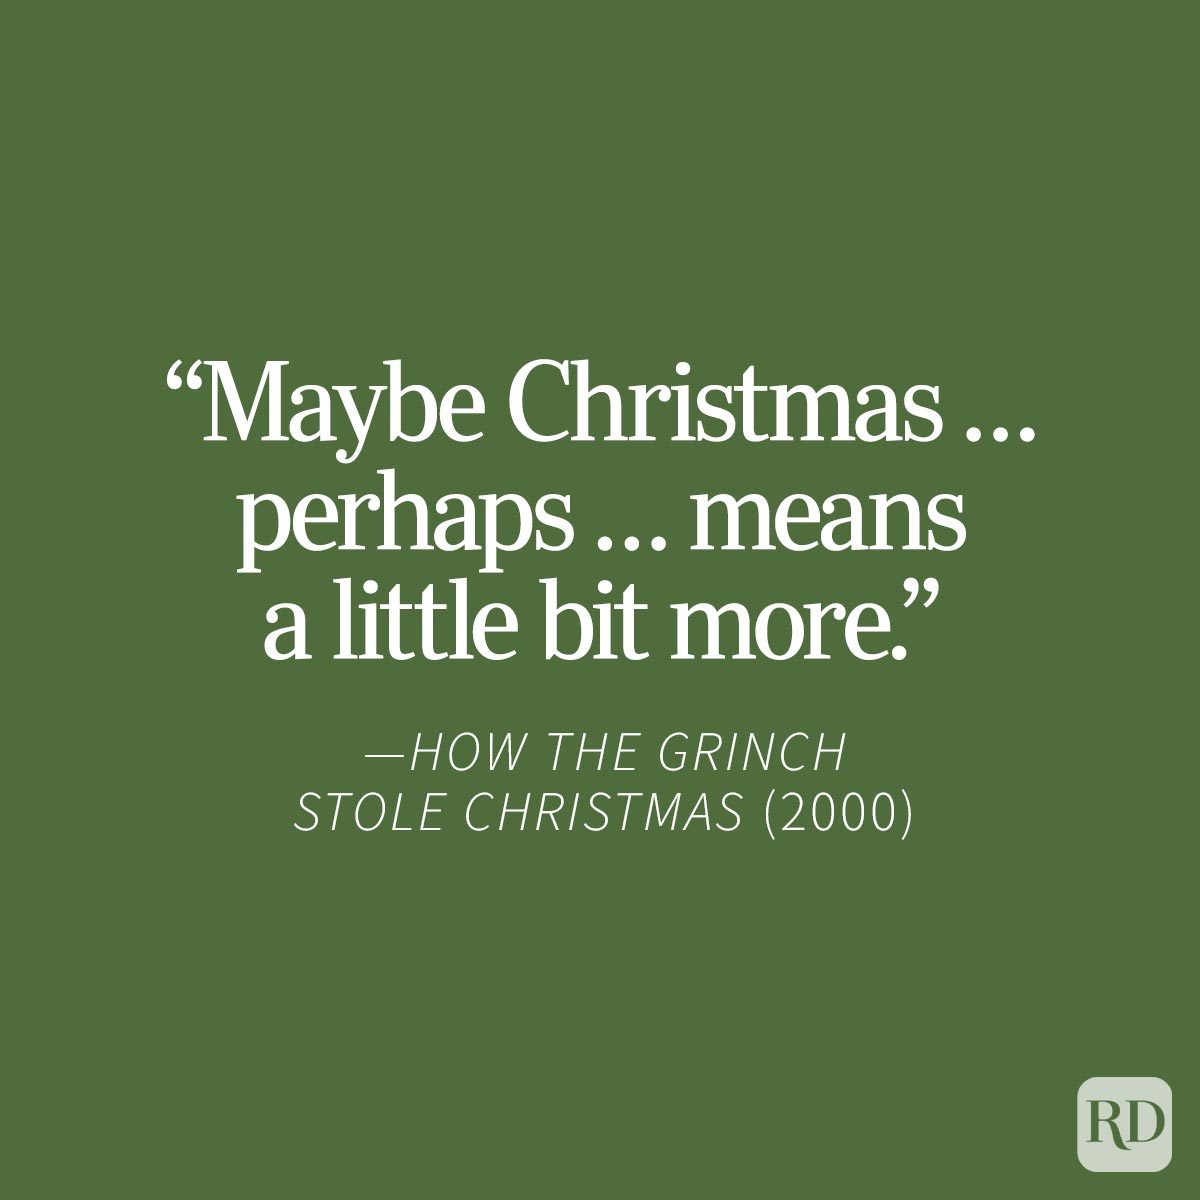 60 Christmas Movie Quotes: Funny and Iconic Quotes and Lines 2023